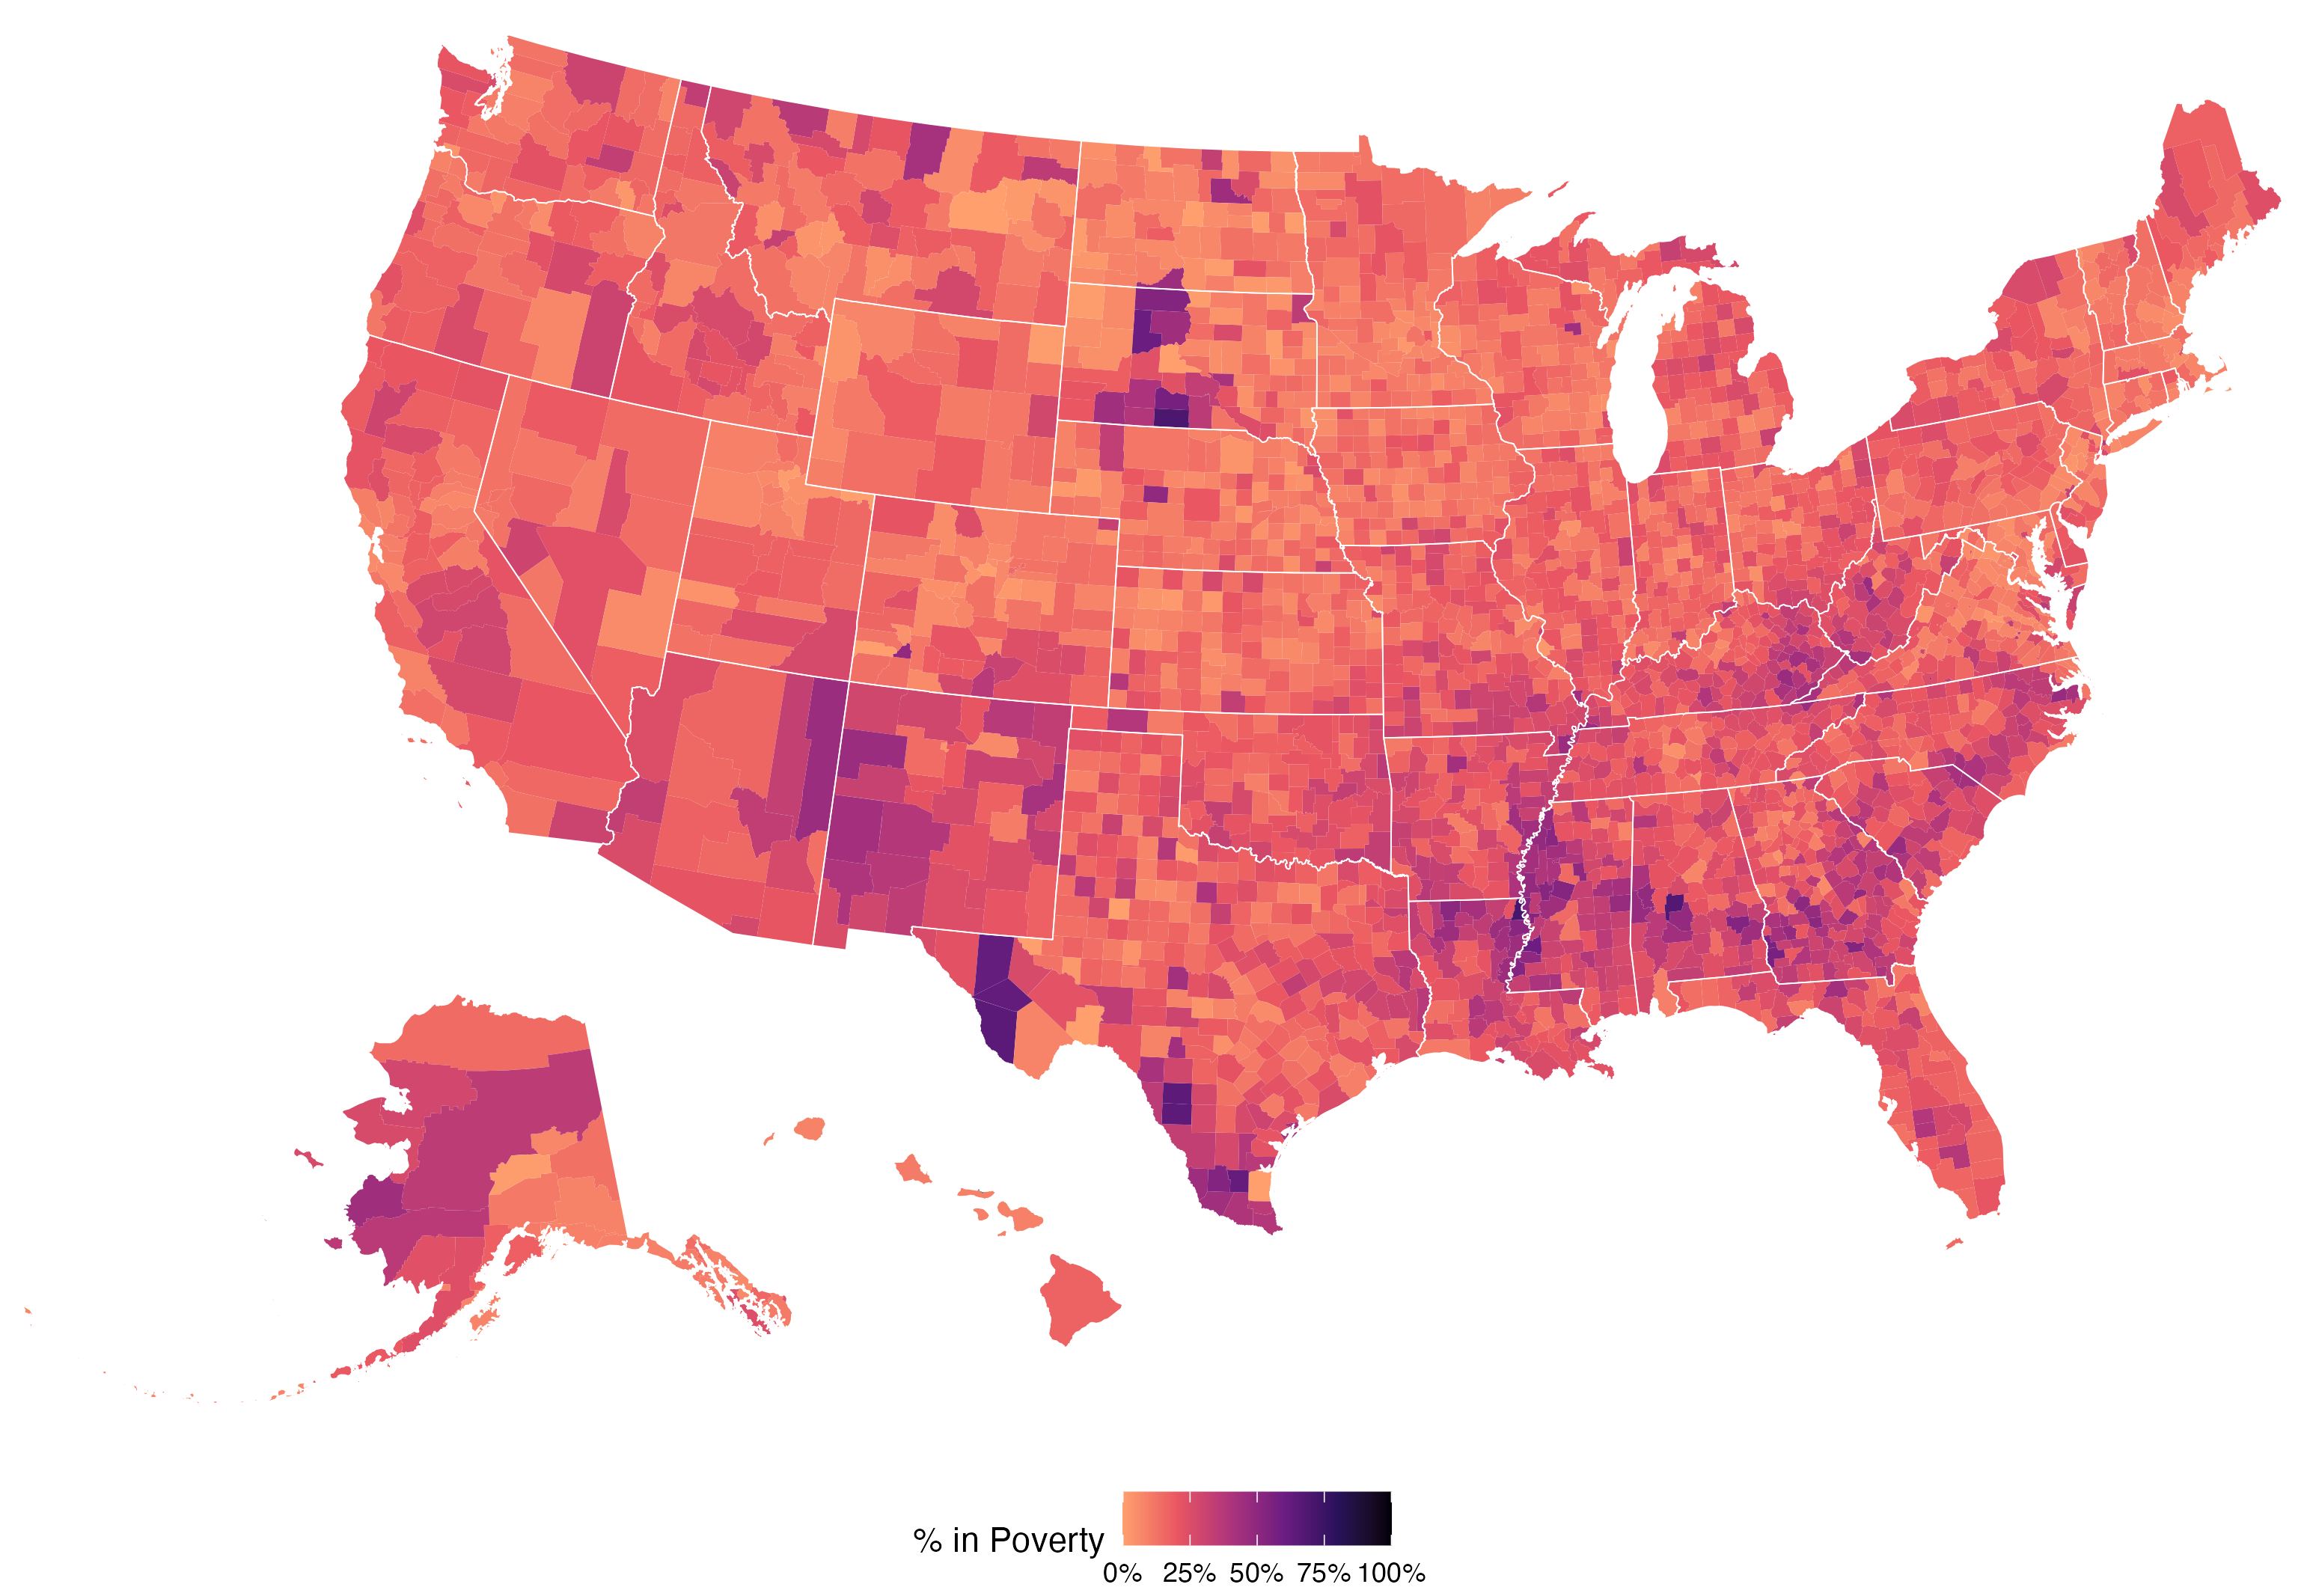 a map of poverty rates by US county